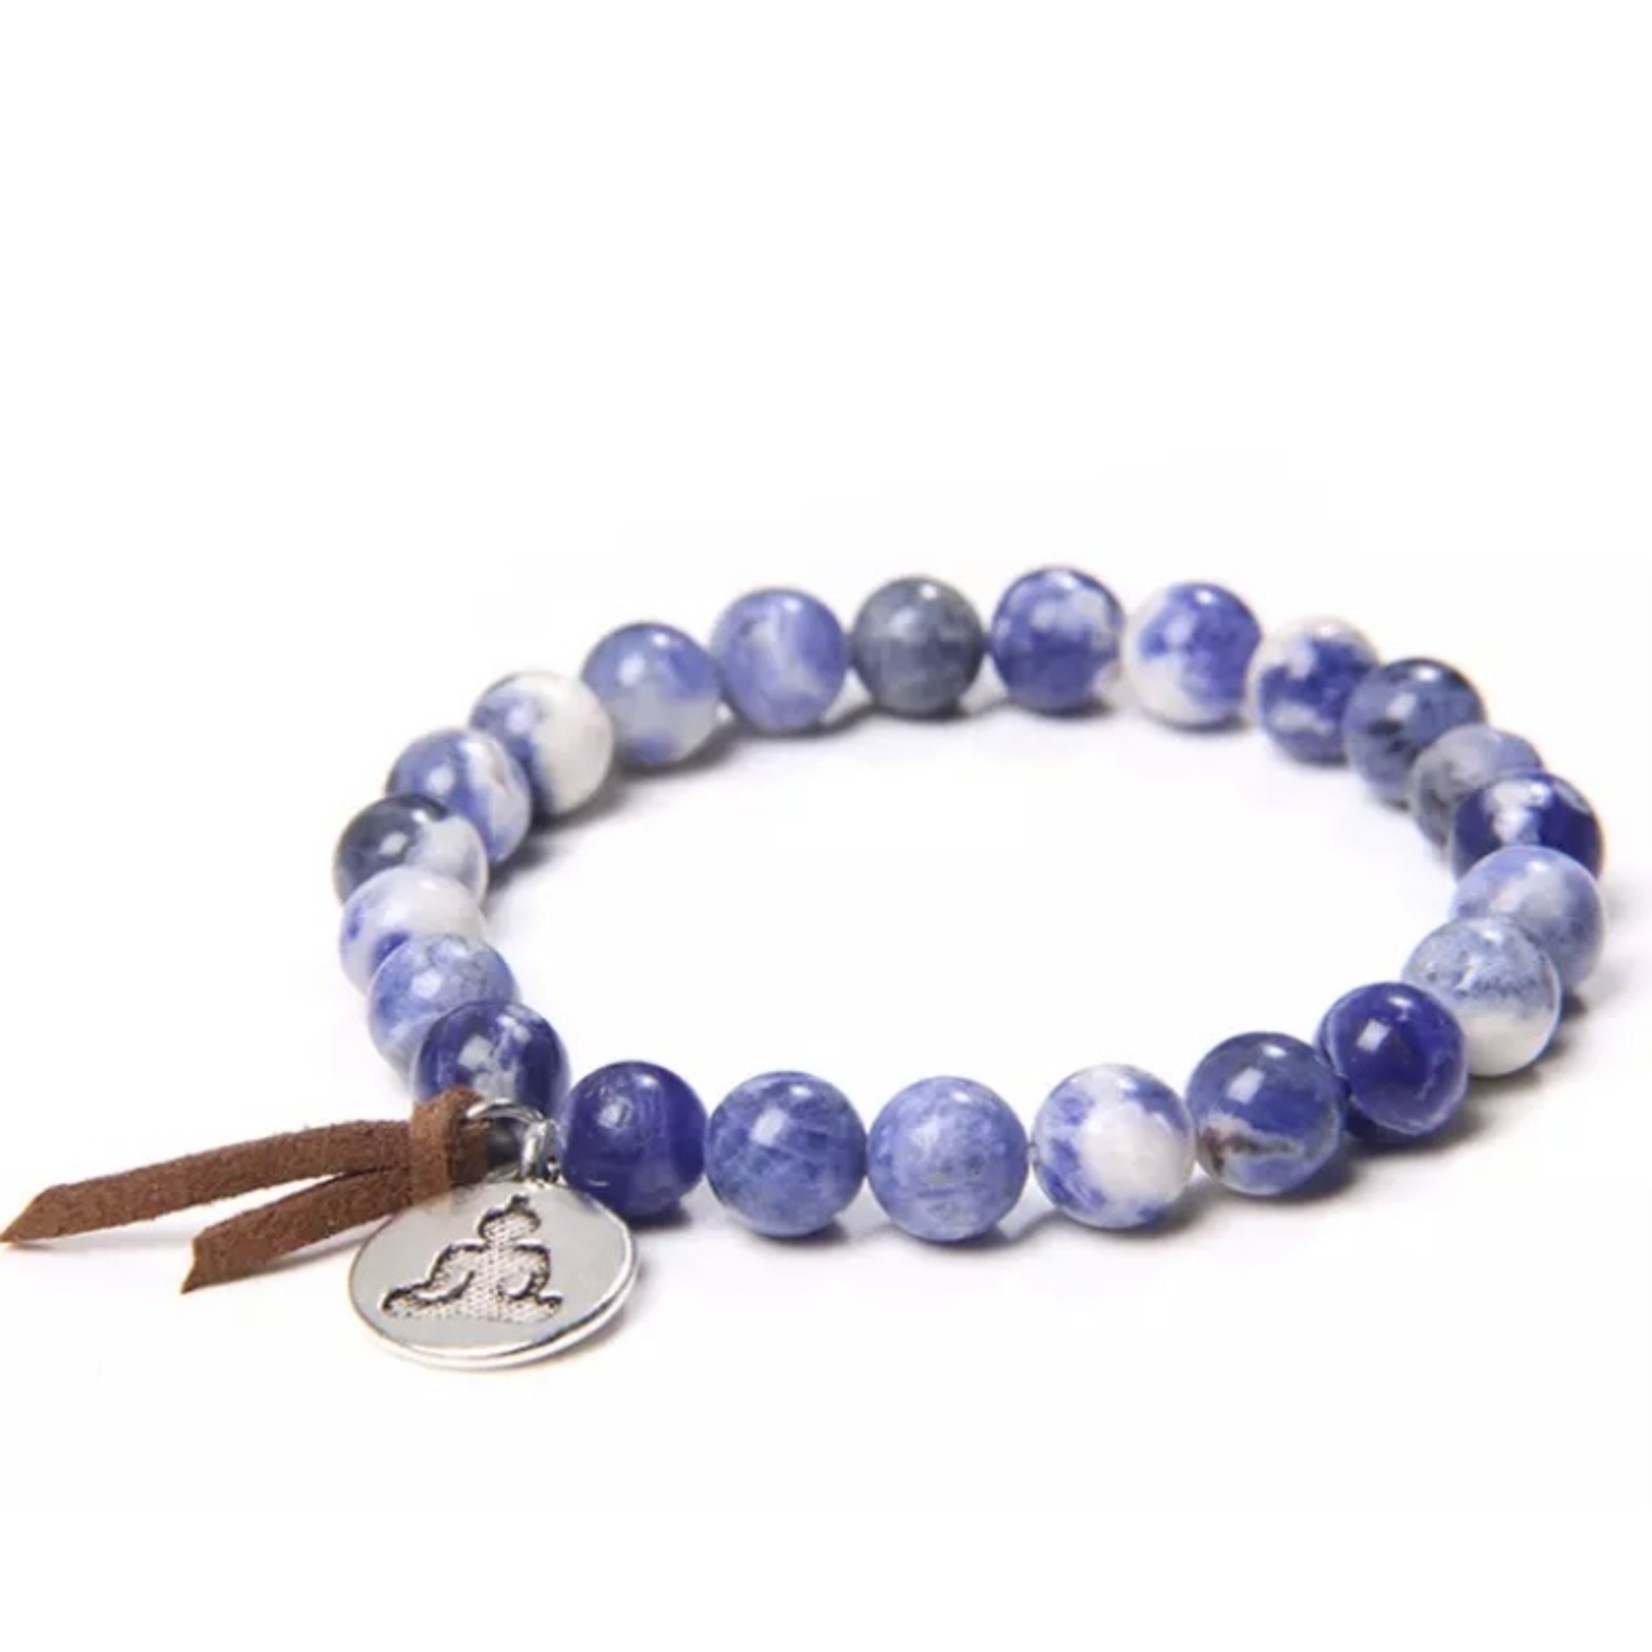 Natural Stone and Wood Bracelets 21cm - Simple and Natural Elegance